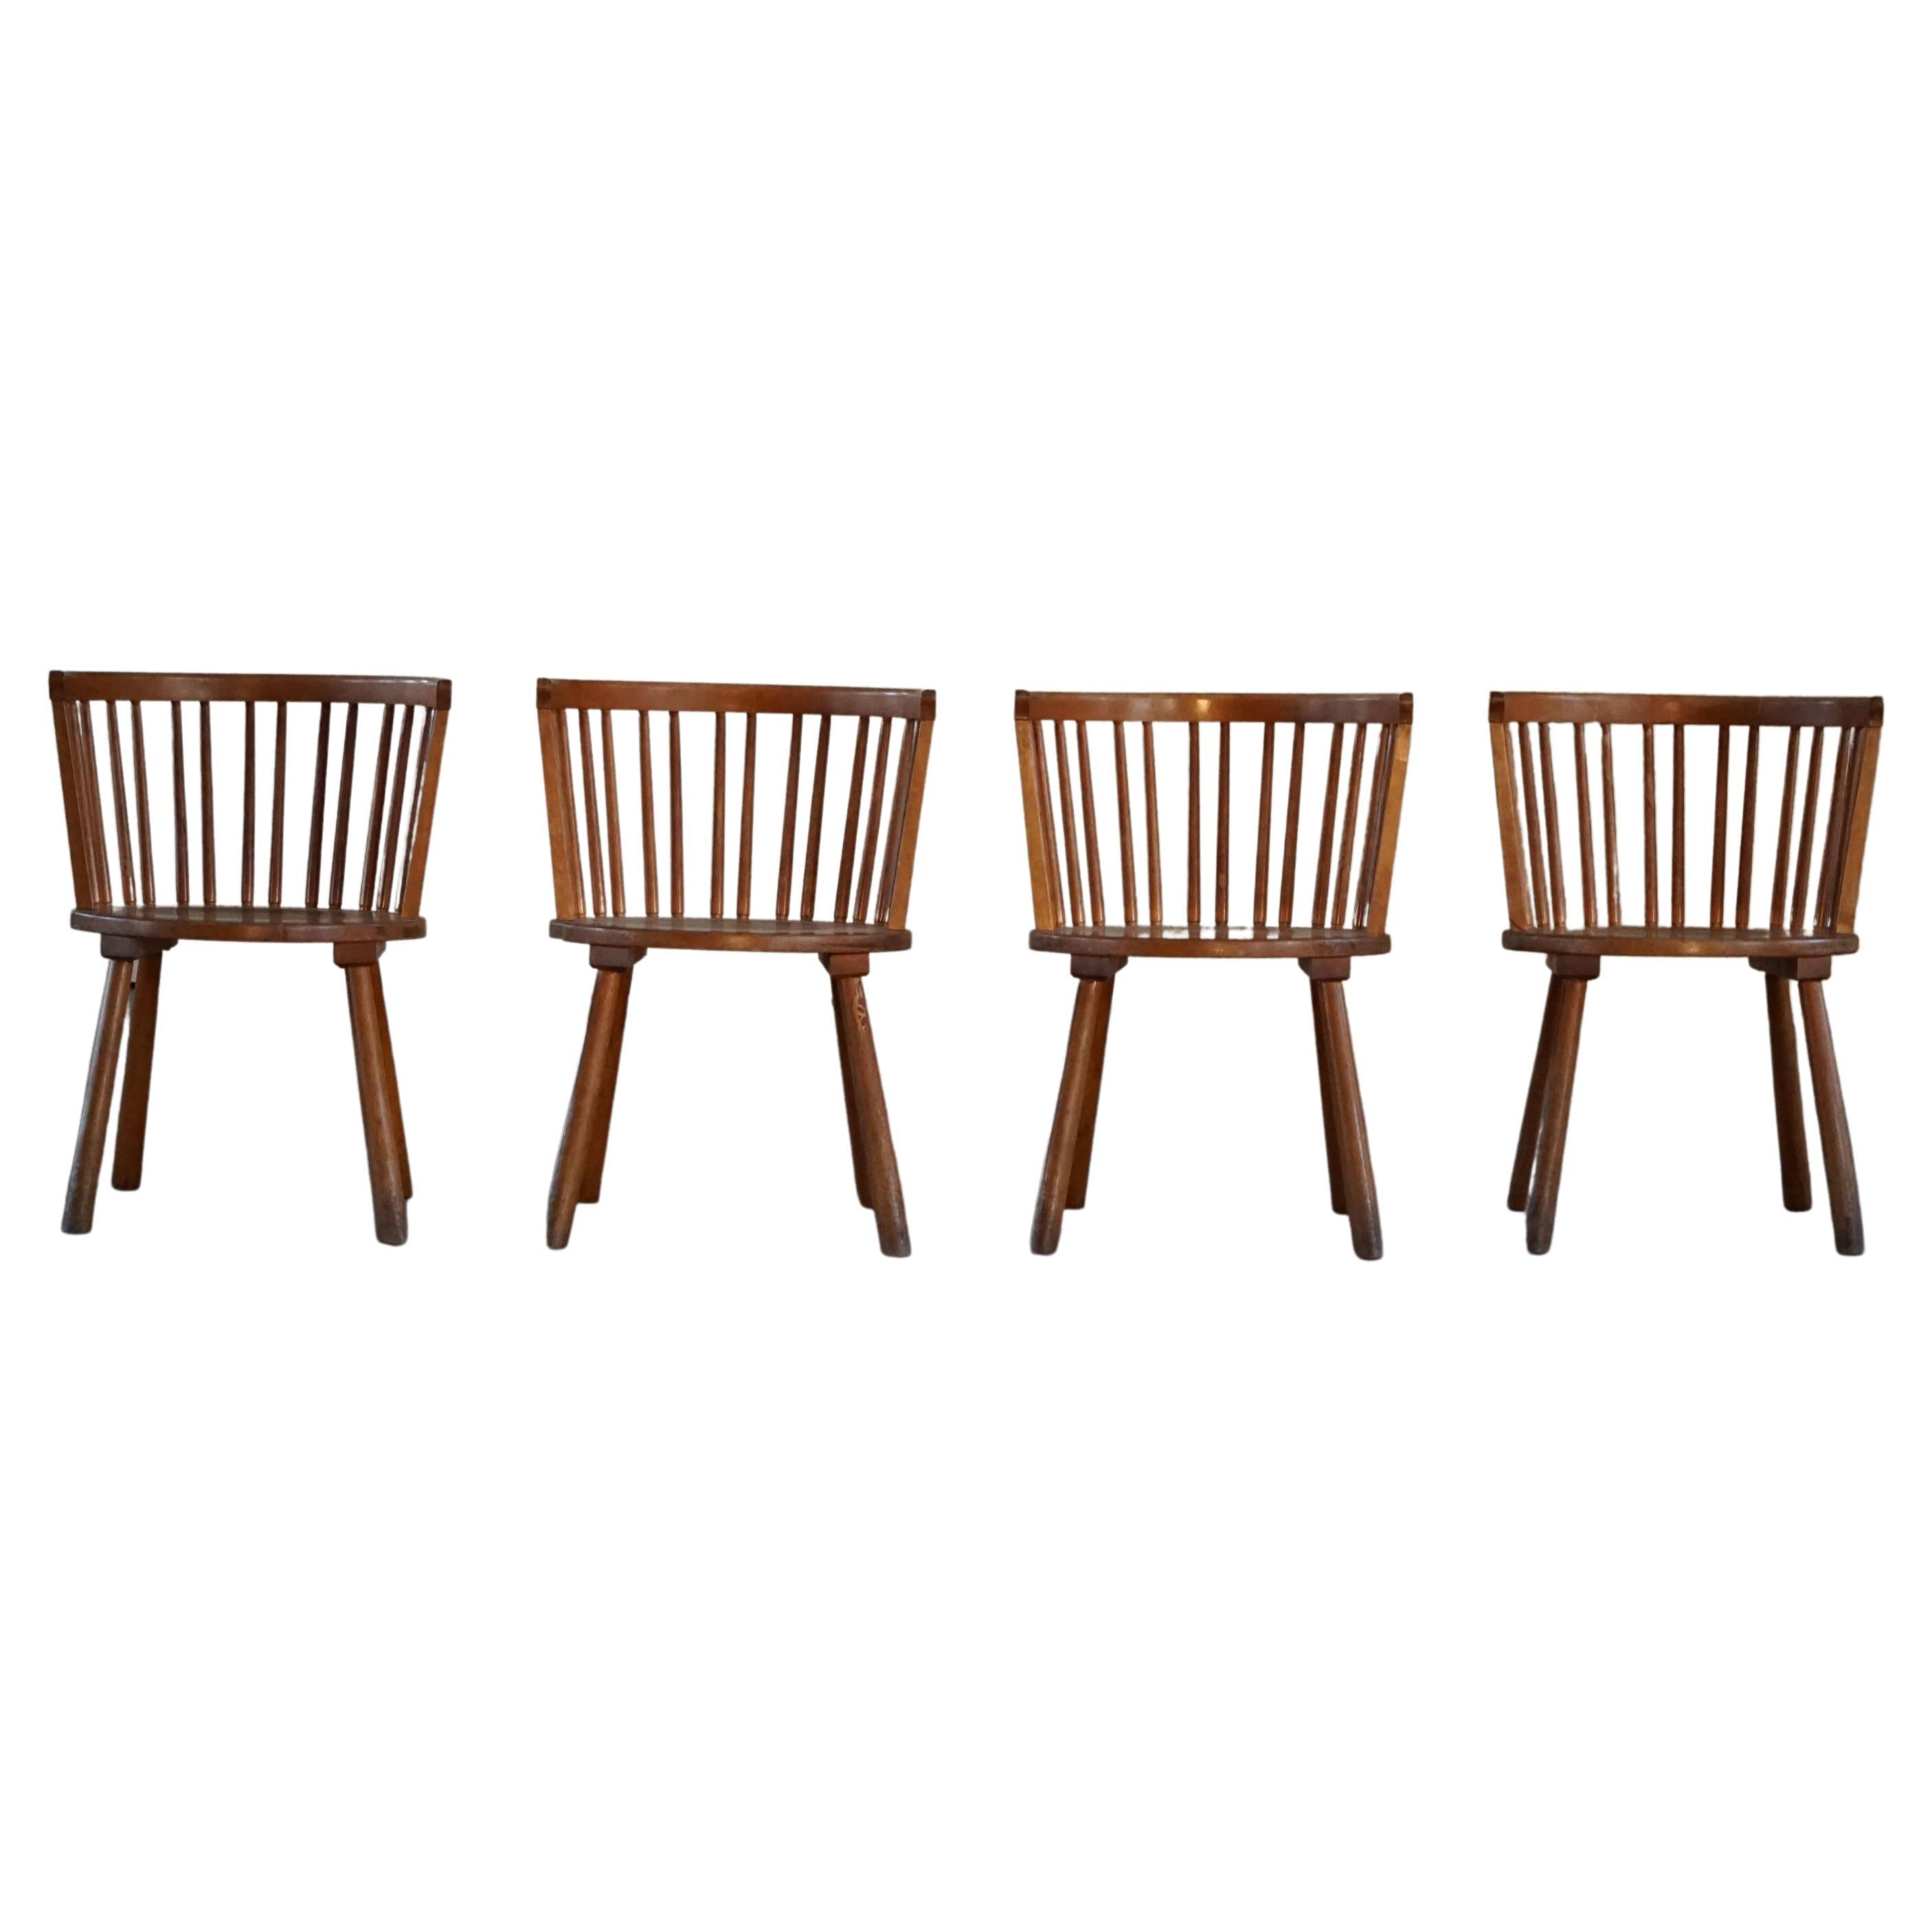 Swedish Modern Set of 4 Armchairs in the Style of Axel Einar Hjorth, 1930s For Sale